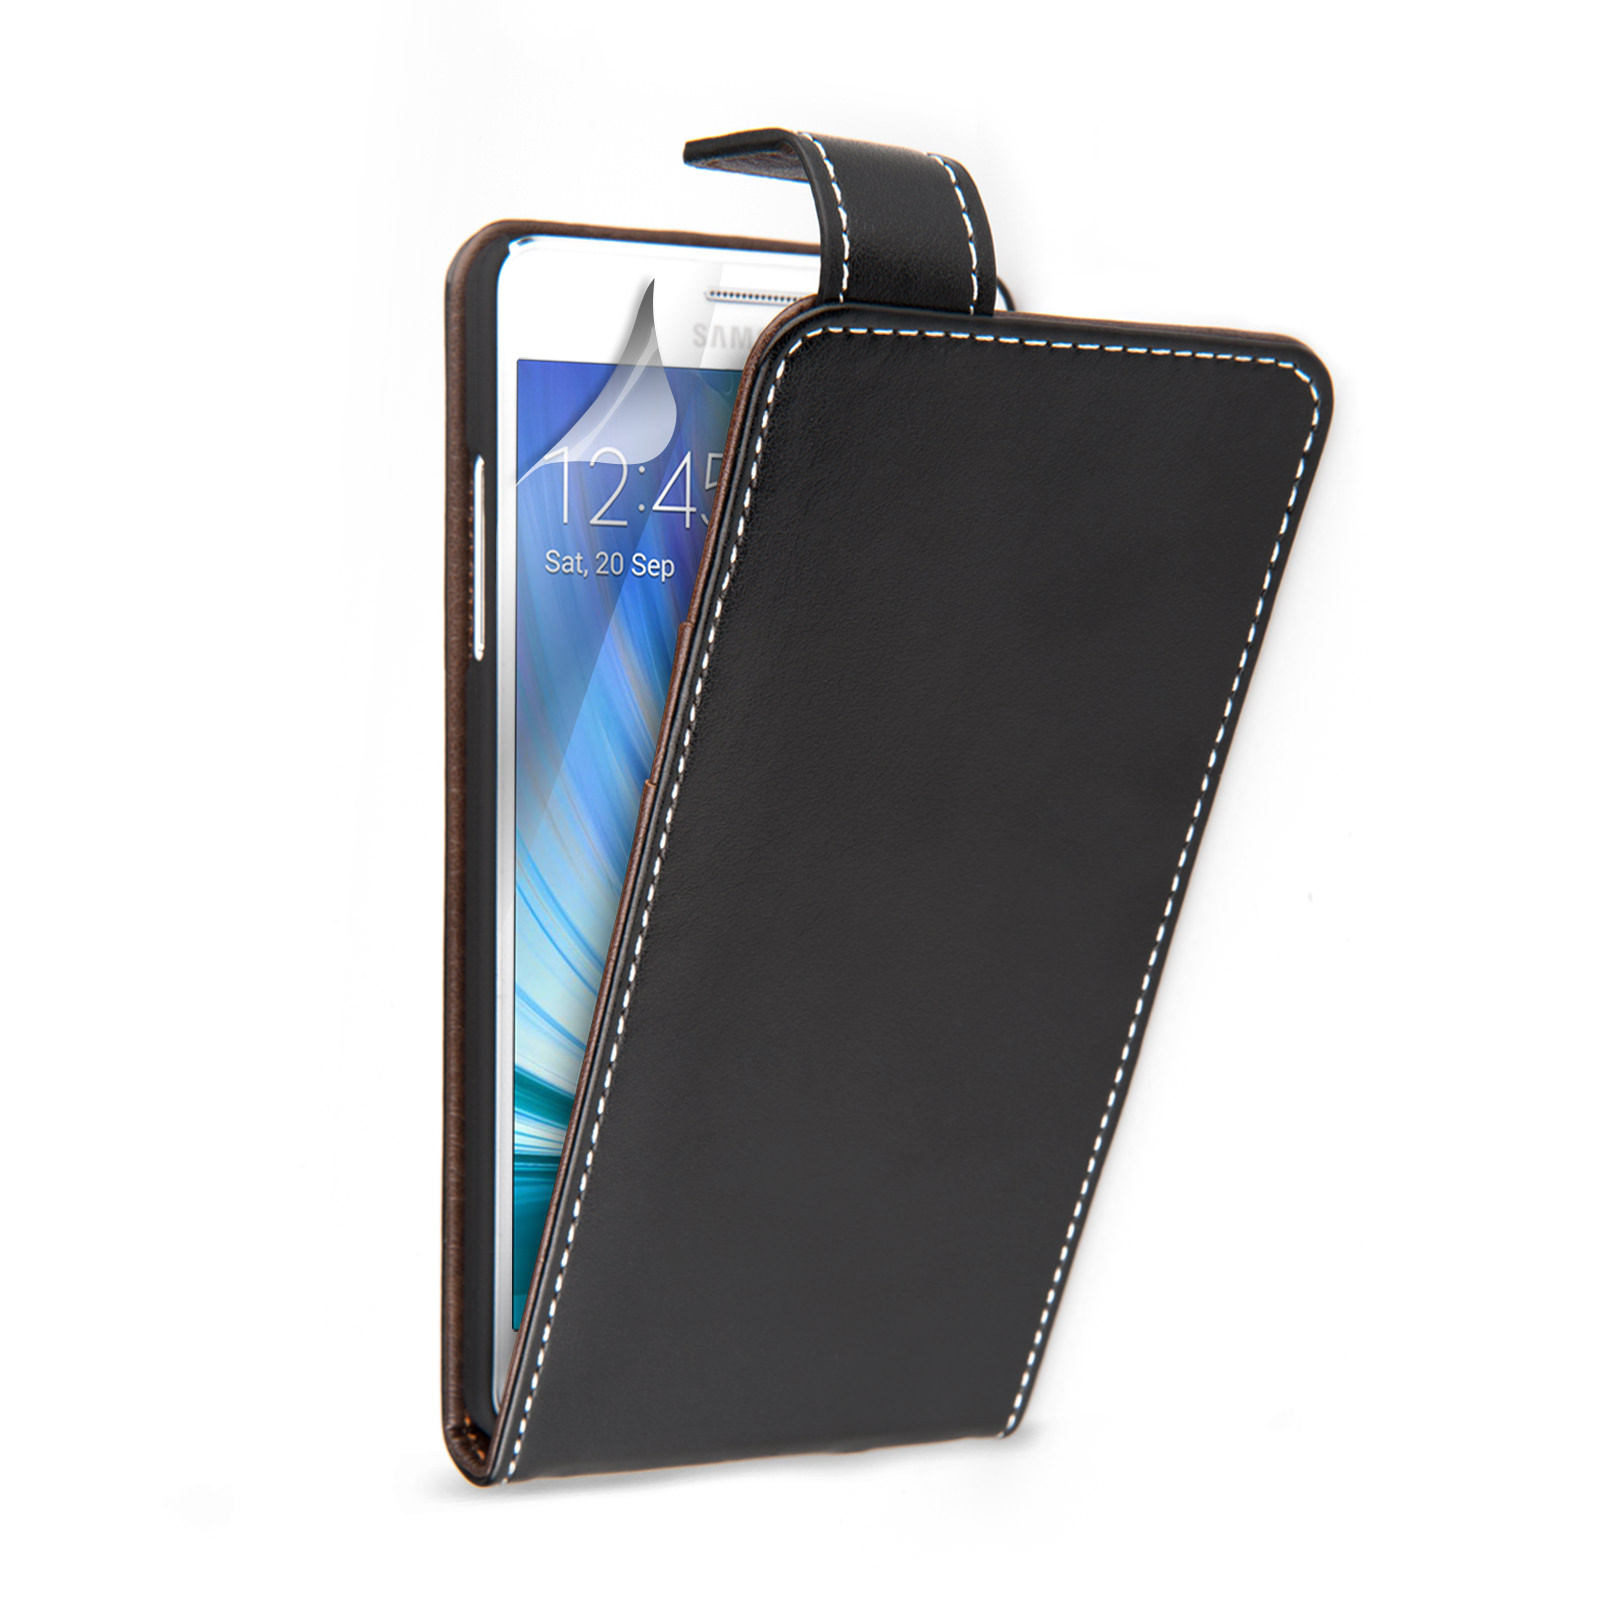 YouSave Samsung Galaxy A5 Leather-Effect Flip Case with Slots – Black